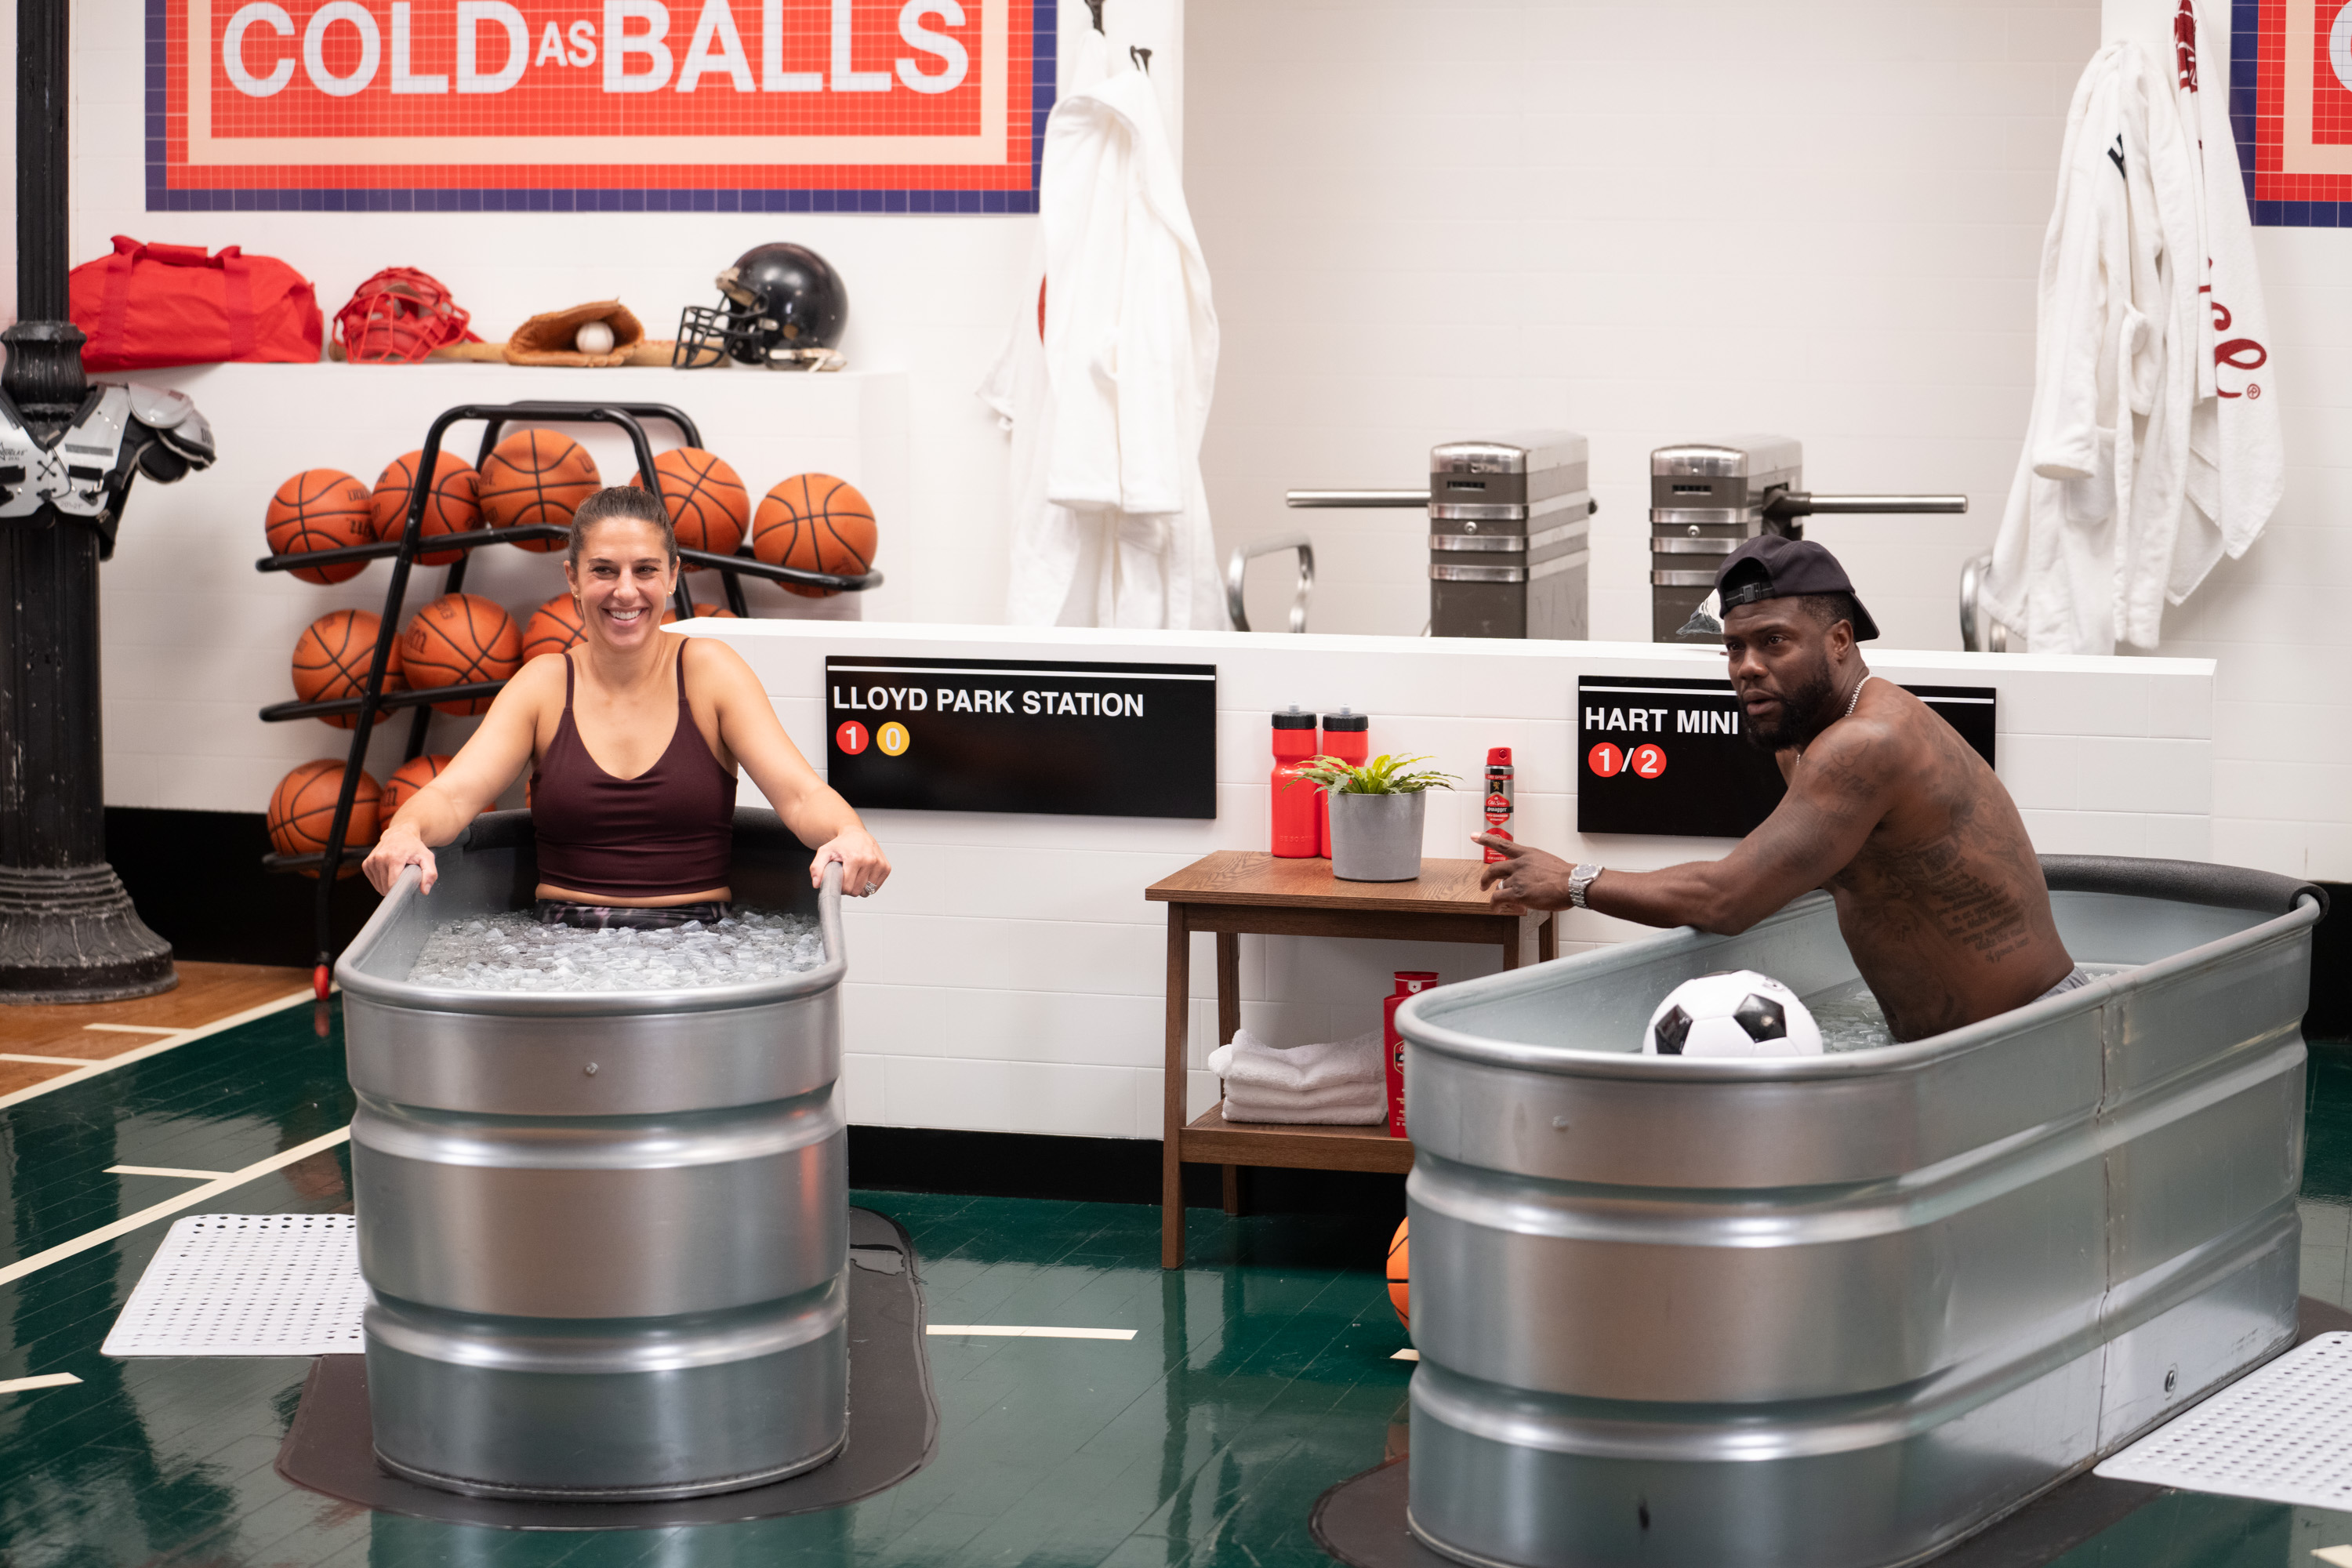 Carli Lloyd and Kevin Hart on Cold As Balls